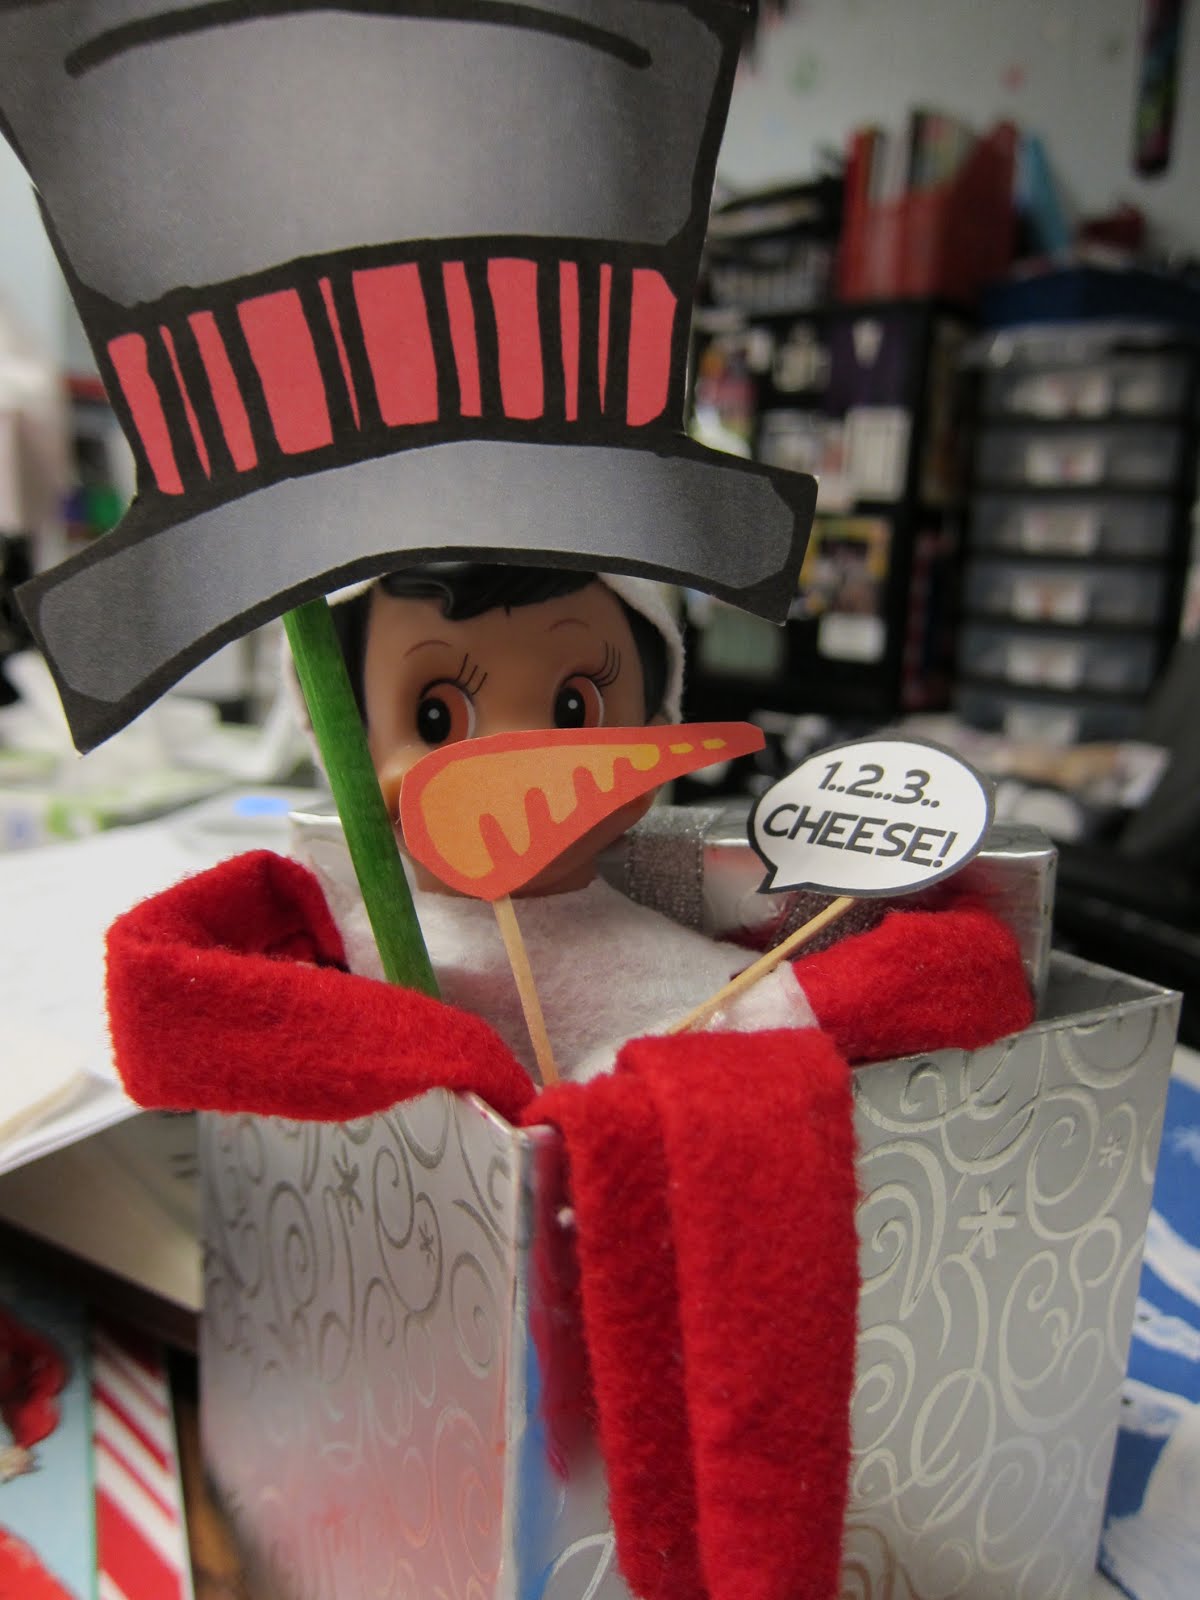 Seusstastic Classroom Inspirations: Elf on the Shelf, Gifts, & More!